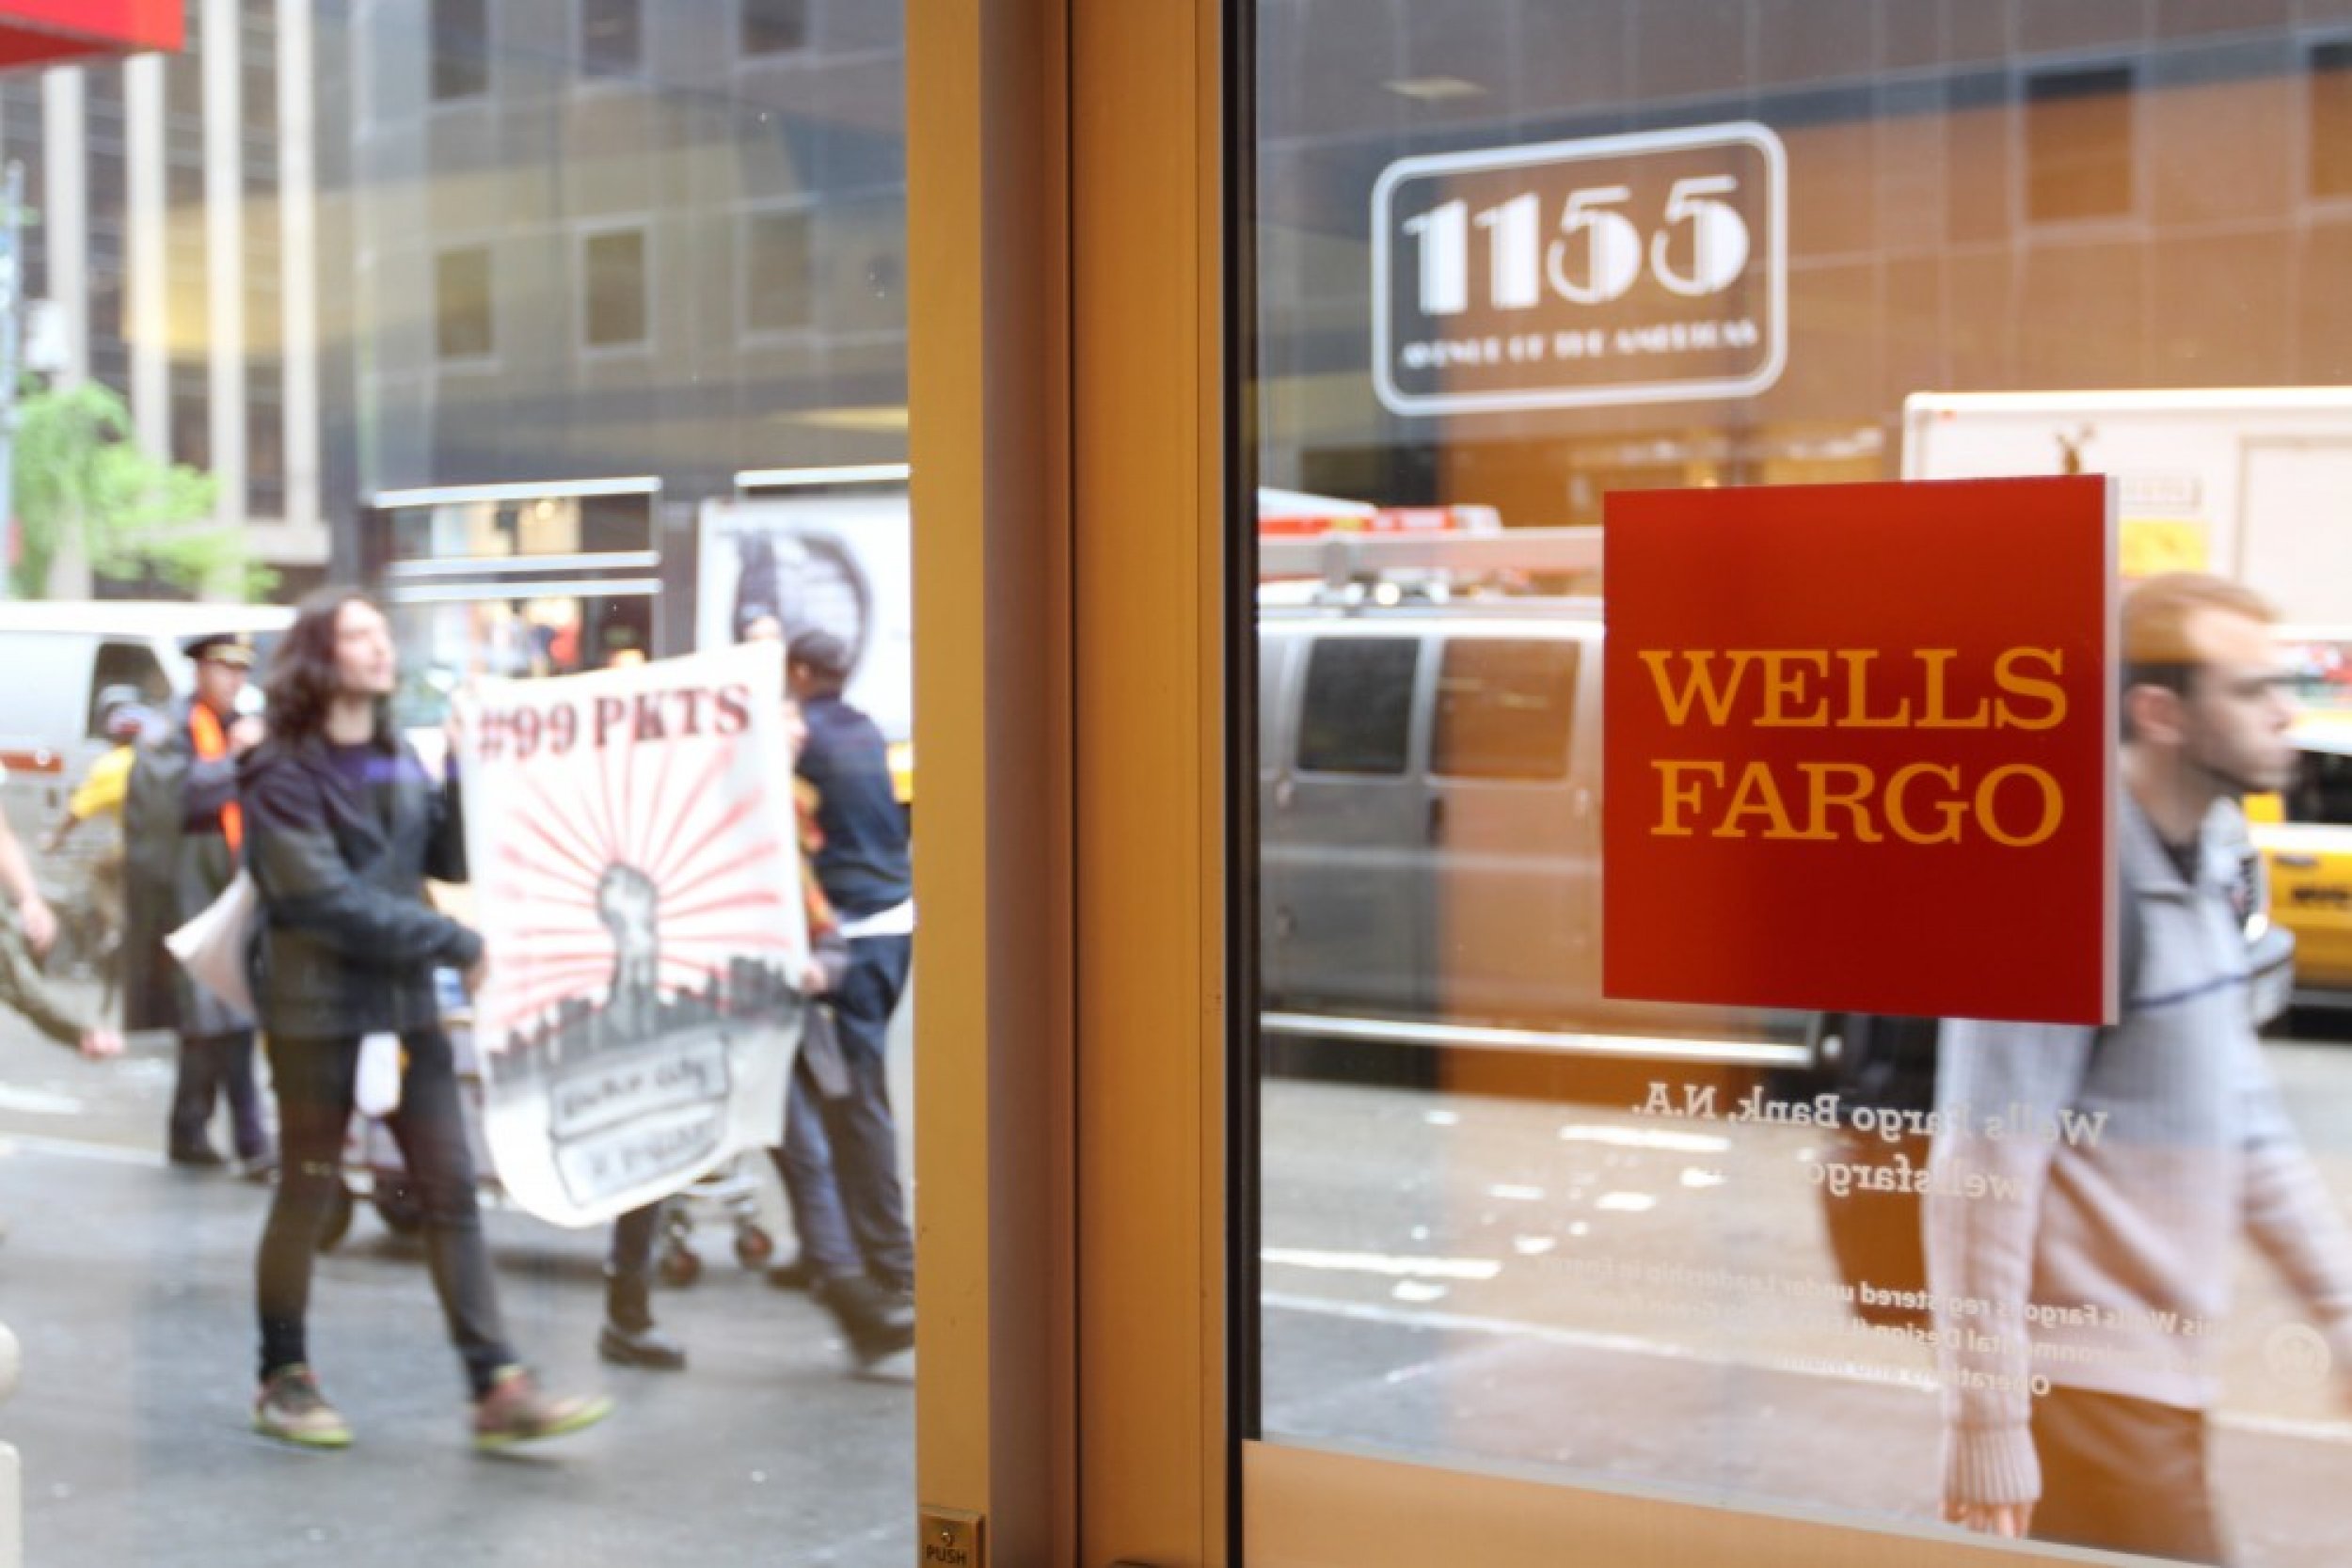 Small, rapidly-moving picket lines targeted the corporate offices of various firms in Midtown.